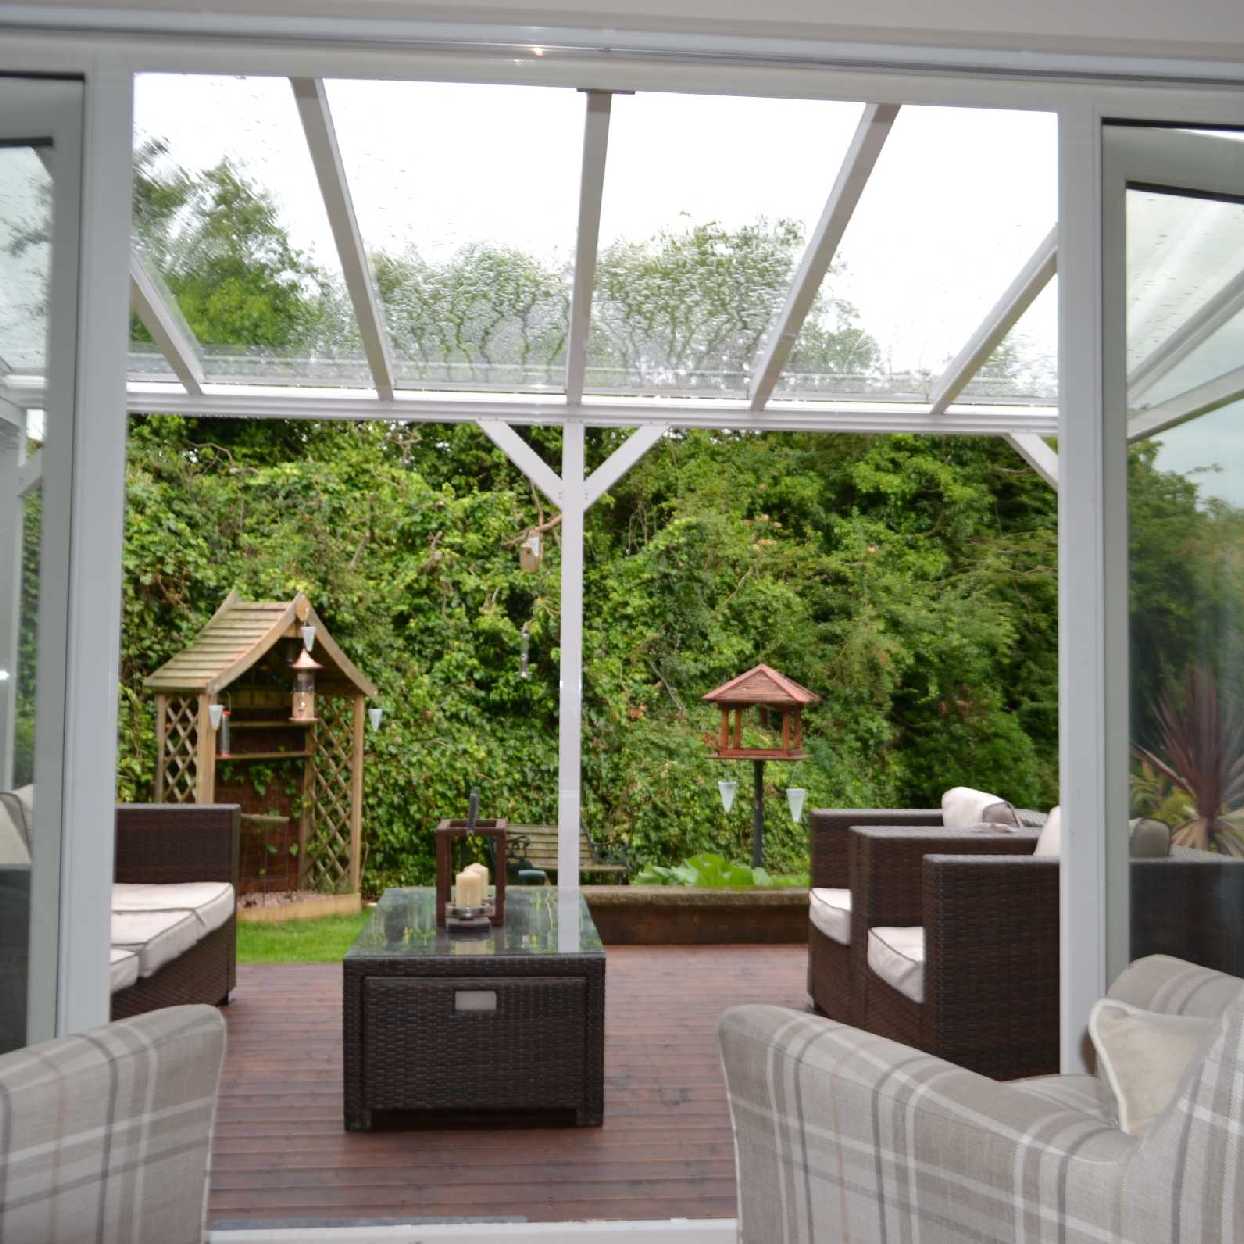 Great selection of Omega Smart Lean-To Canopy, White UNGLAZED for 6mm Glazing - 2.1m (W) x 2.5m (P), (2) Supporting Posts